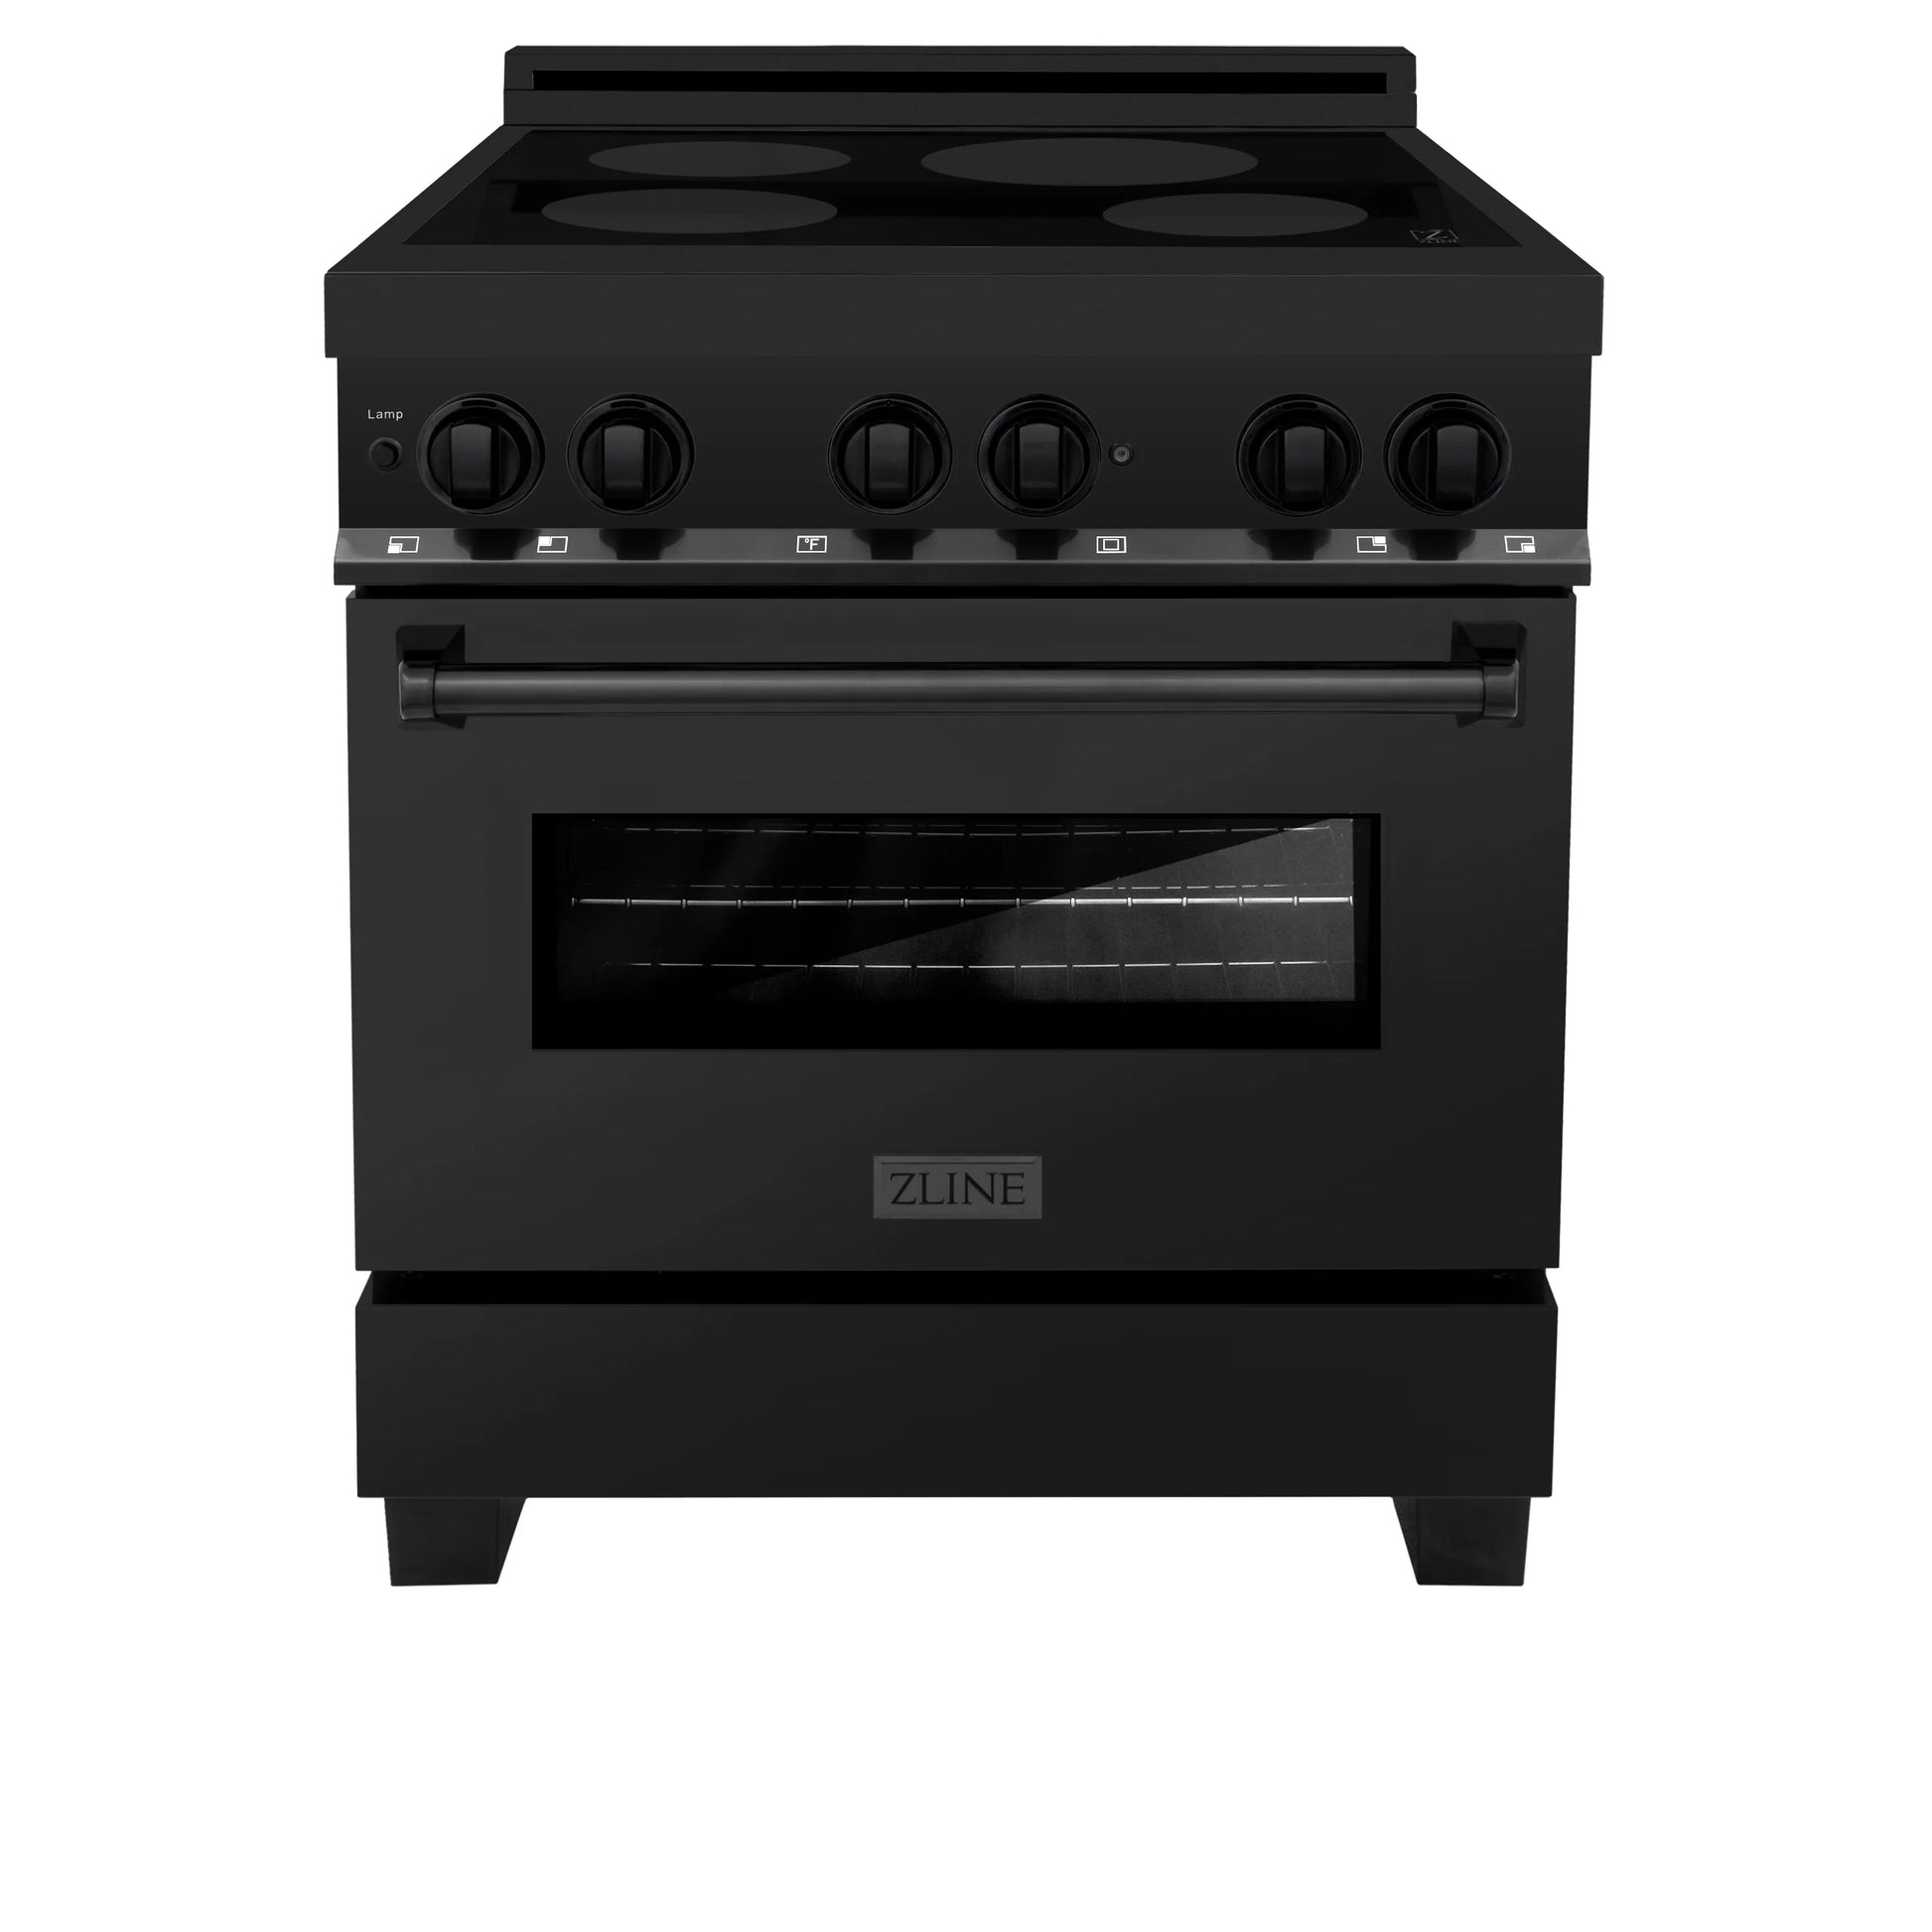 ZLINE 30" 4-Element Stove Induction Range with Electric Oven - Black Stainless Steel